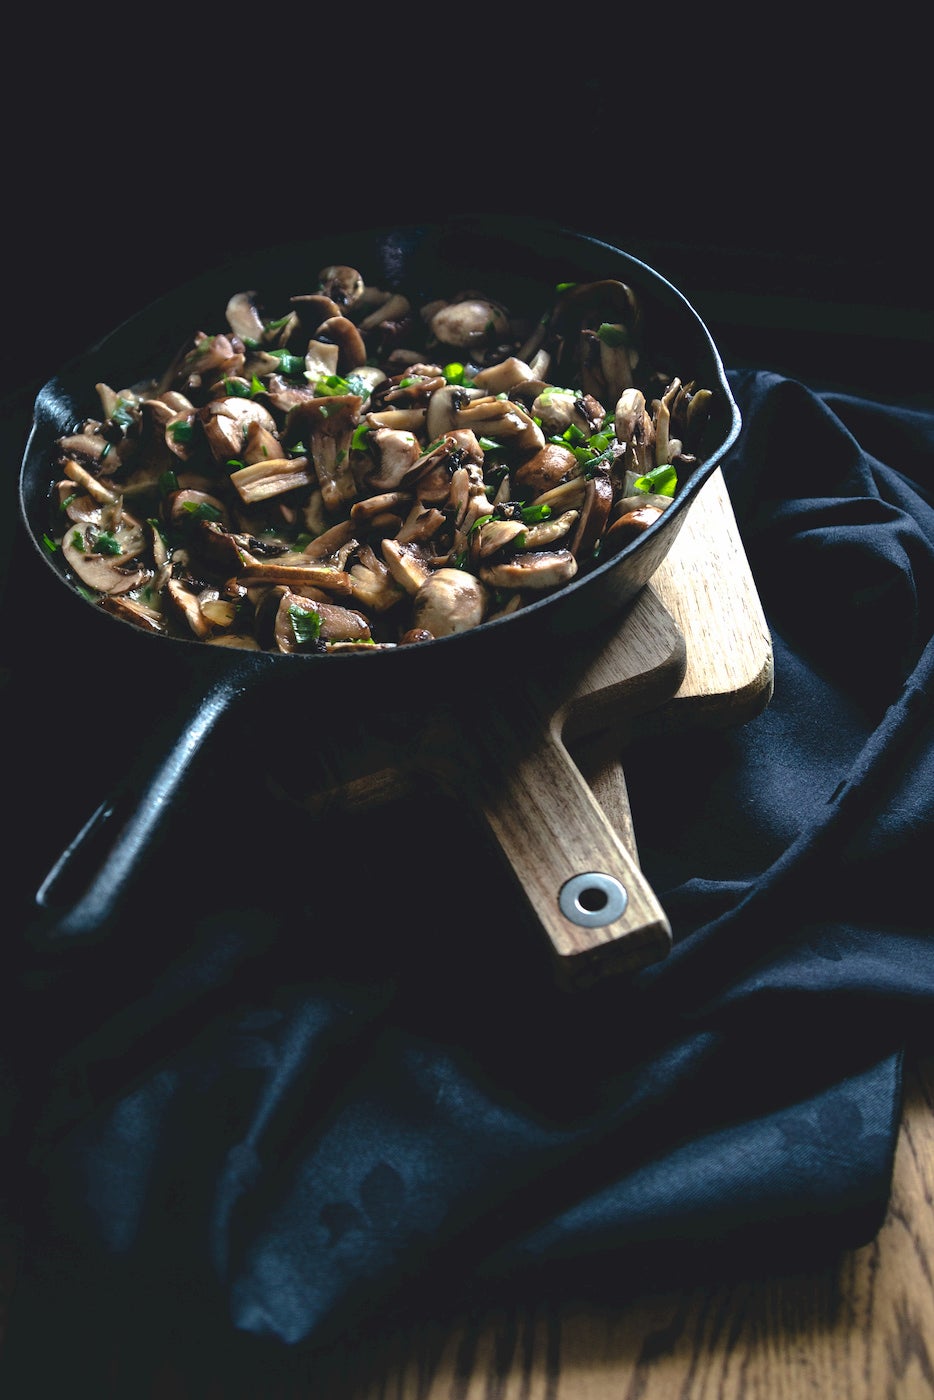 Sauteed mushrooms with herbs in a cast iron.